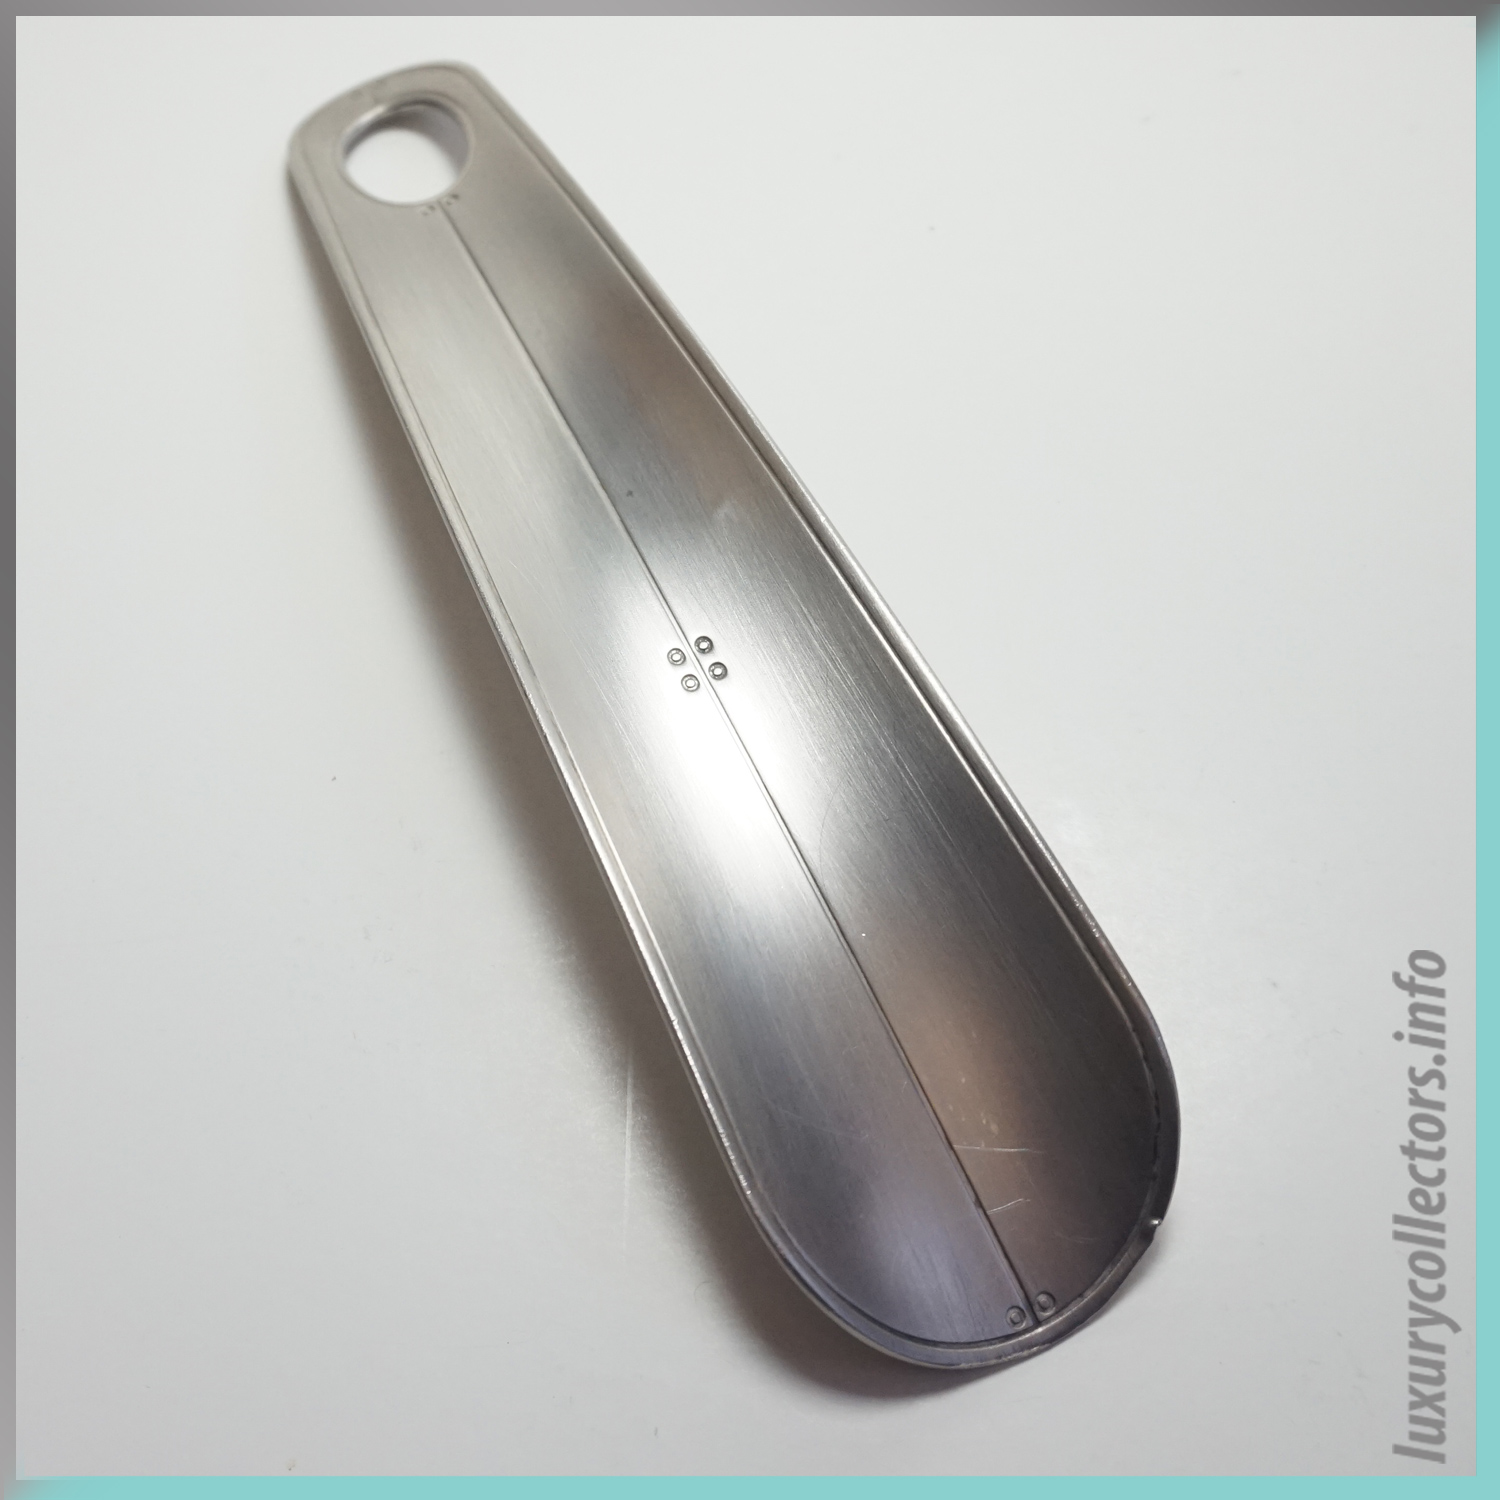 Tiffany & and Co. Streamerica Sterling Silver .925 Collection 2002 Shoe Horn Shoehorn Top